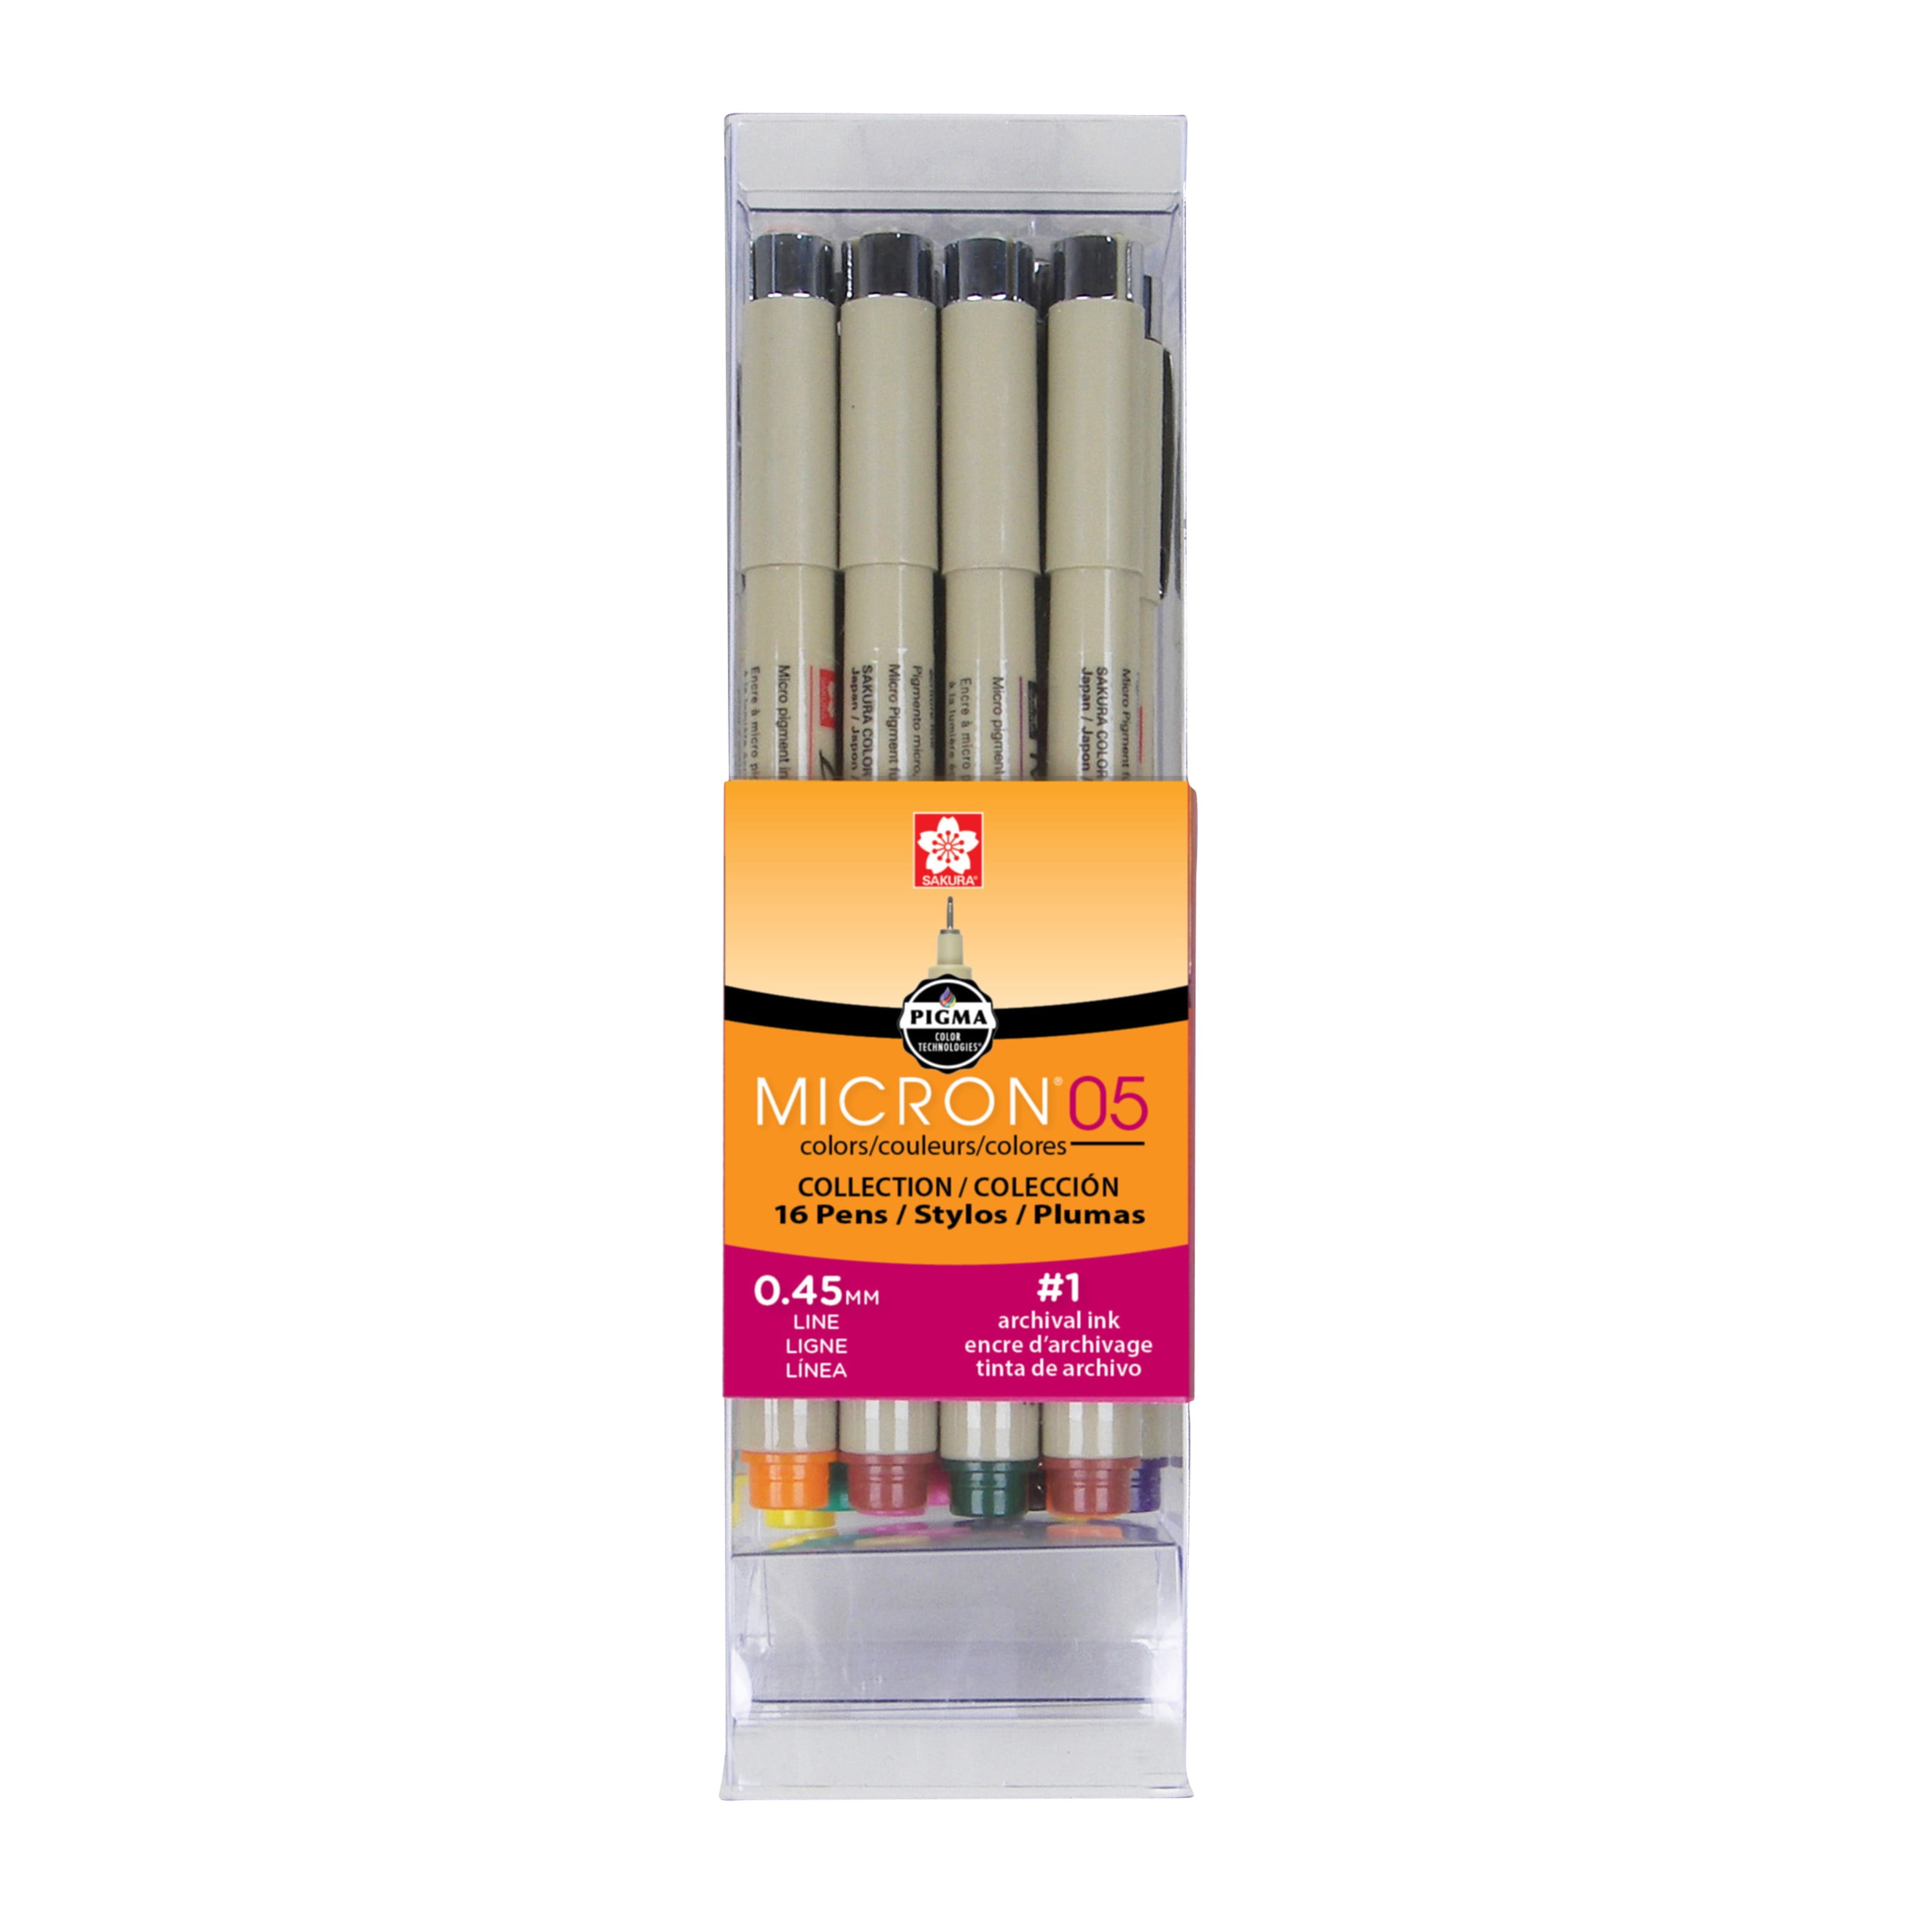 SAKURA Pigma Micron Fineliner Pens - Archival Black Ink Pens - Pens for  Writing Drawing or Journaling - Assorted Point Sizes - 8 Pack Black 8 Count  (Pack of 1) Ink Pen Set